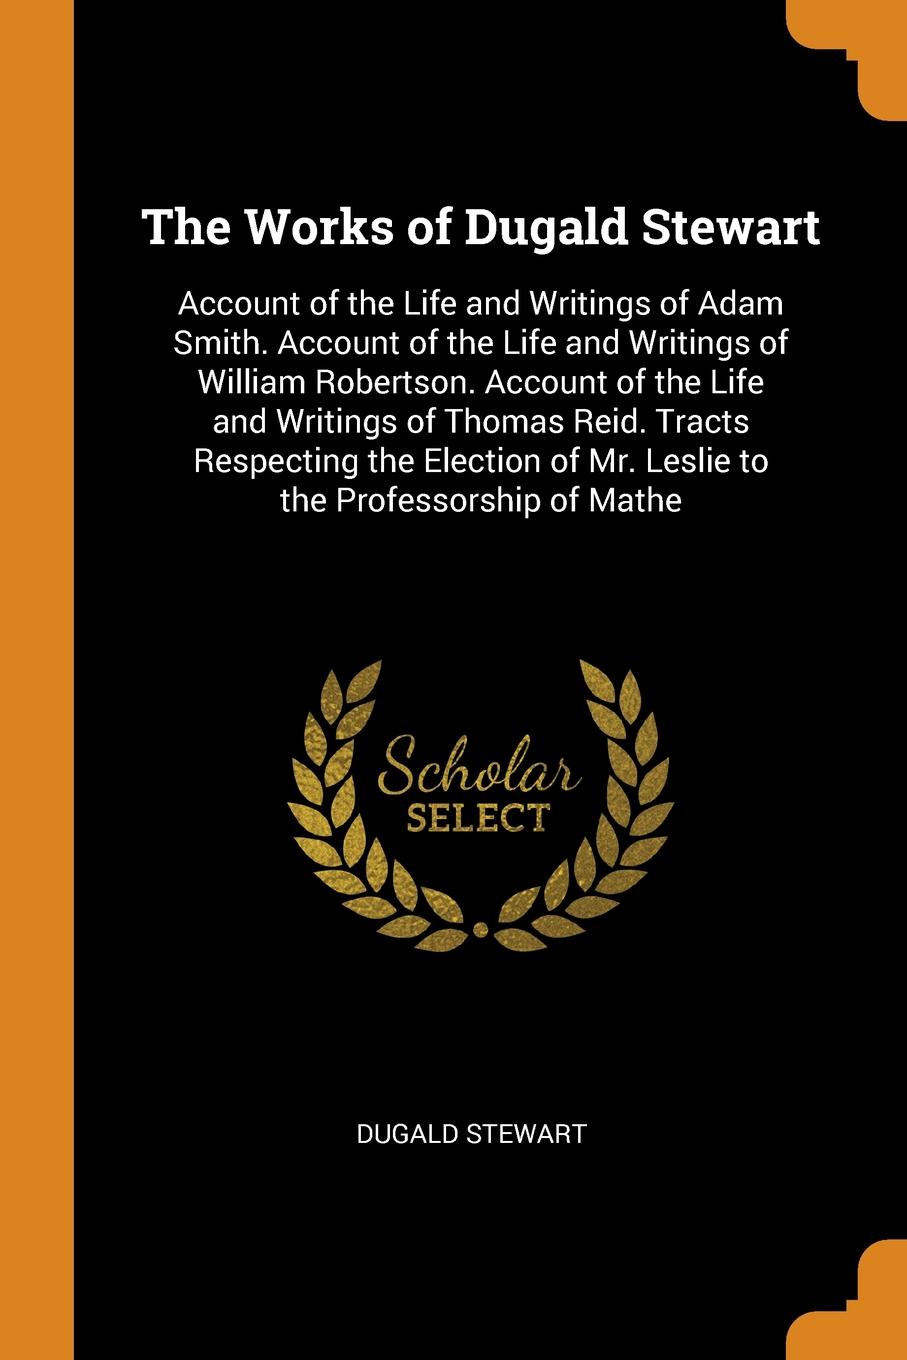 The Works of Dugald Stewart. Account of the Life and Writings of Adam Smith. Account of the Life and Writings of William Robertson. Account of the Life and Writings of Thomas Reid. Tracts Respecting the Election of Mr. Leslie to the Professorship ...